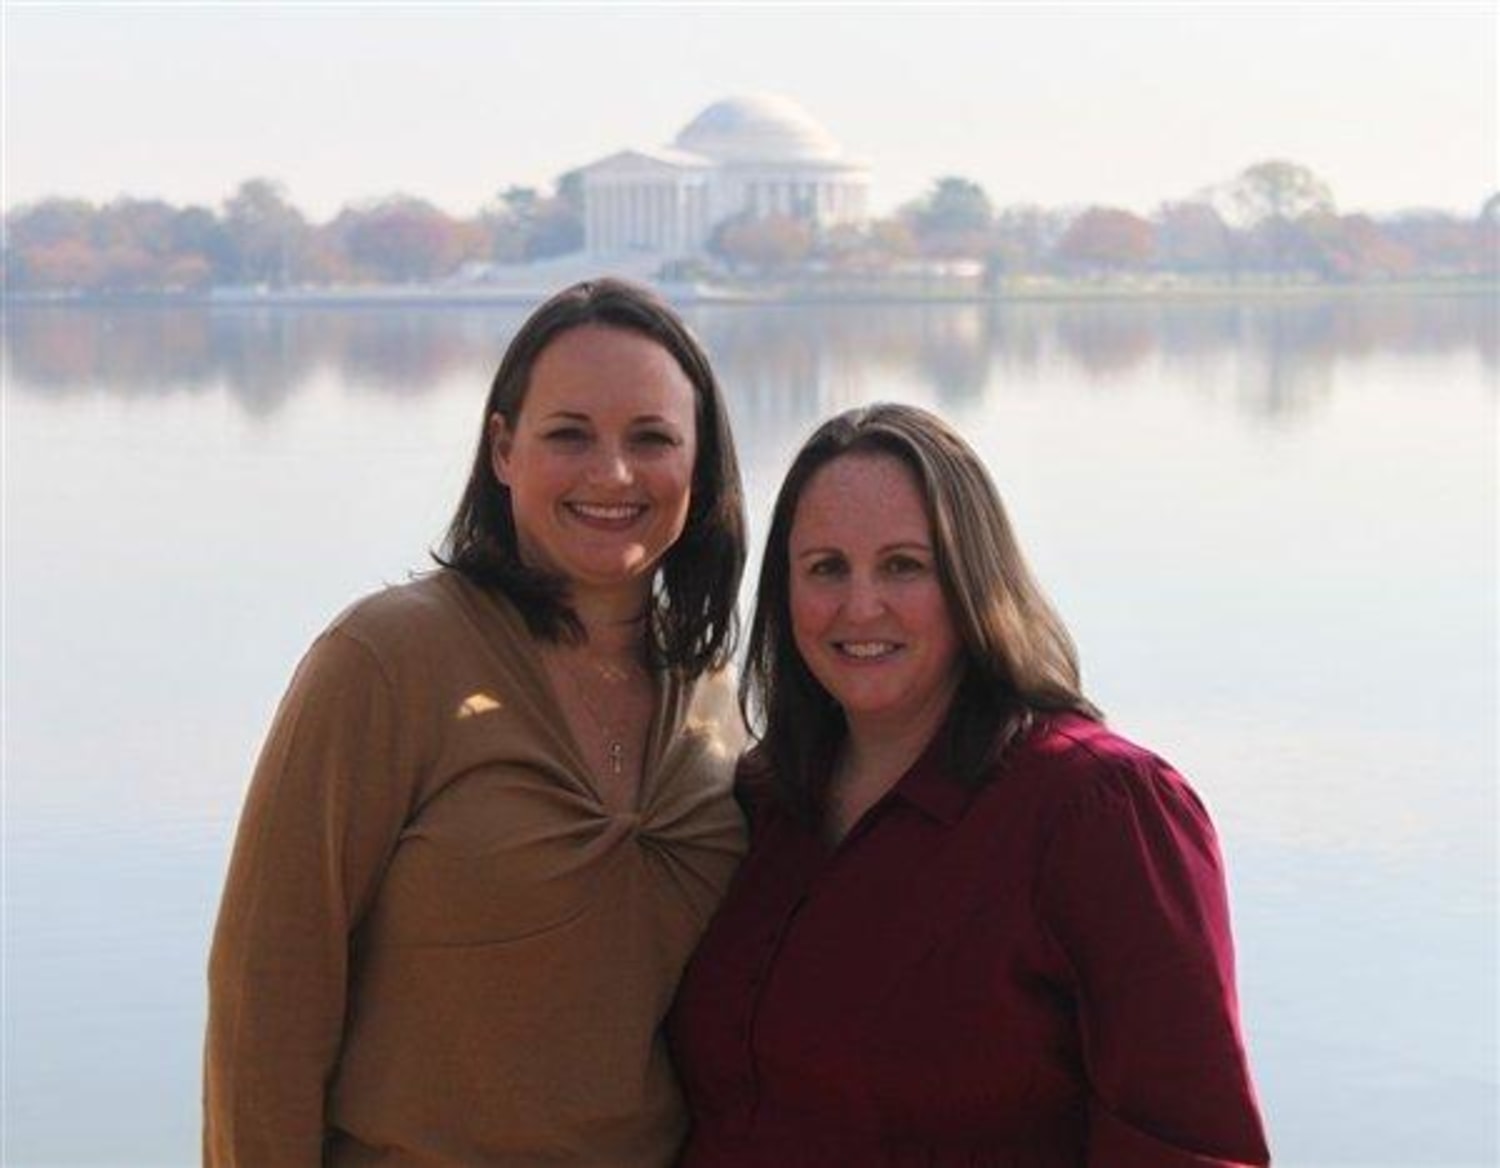 Army spouses club offers special guest membership for same-sex wife picture